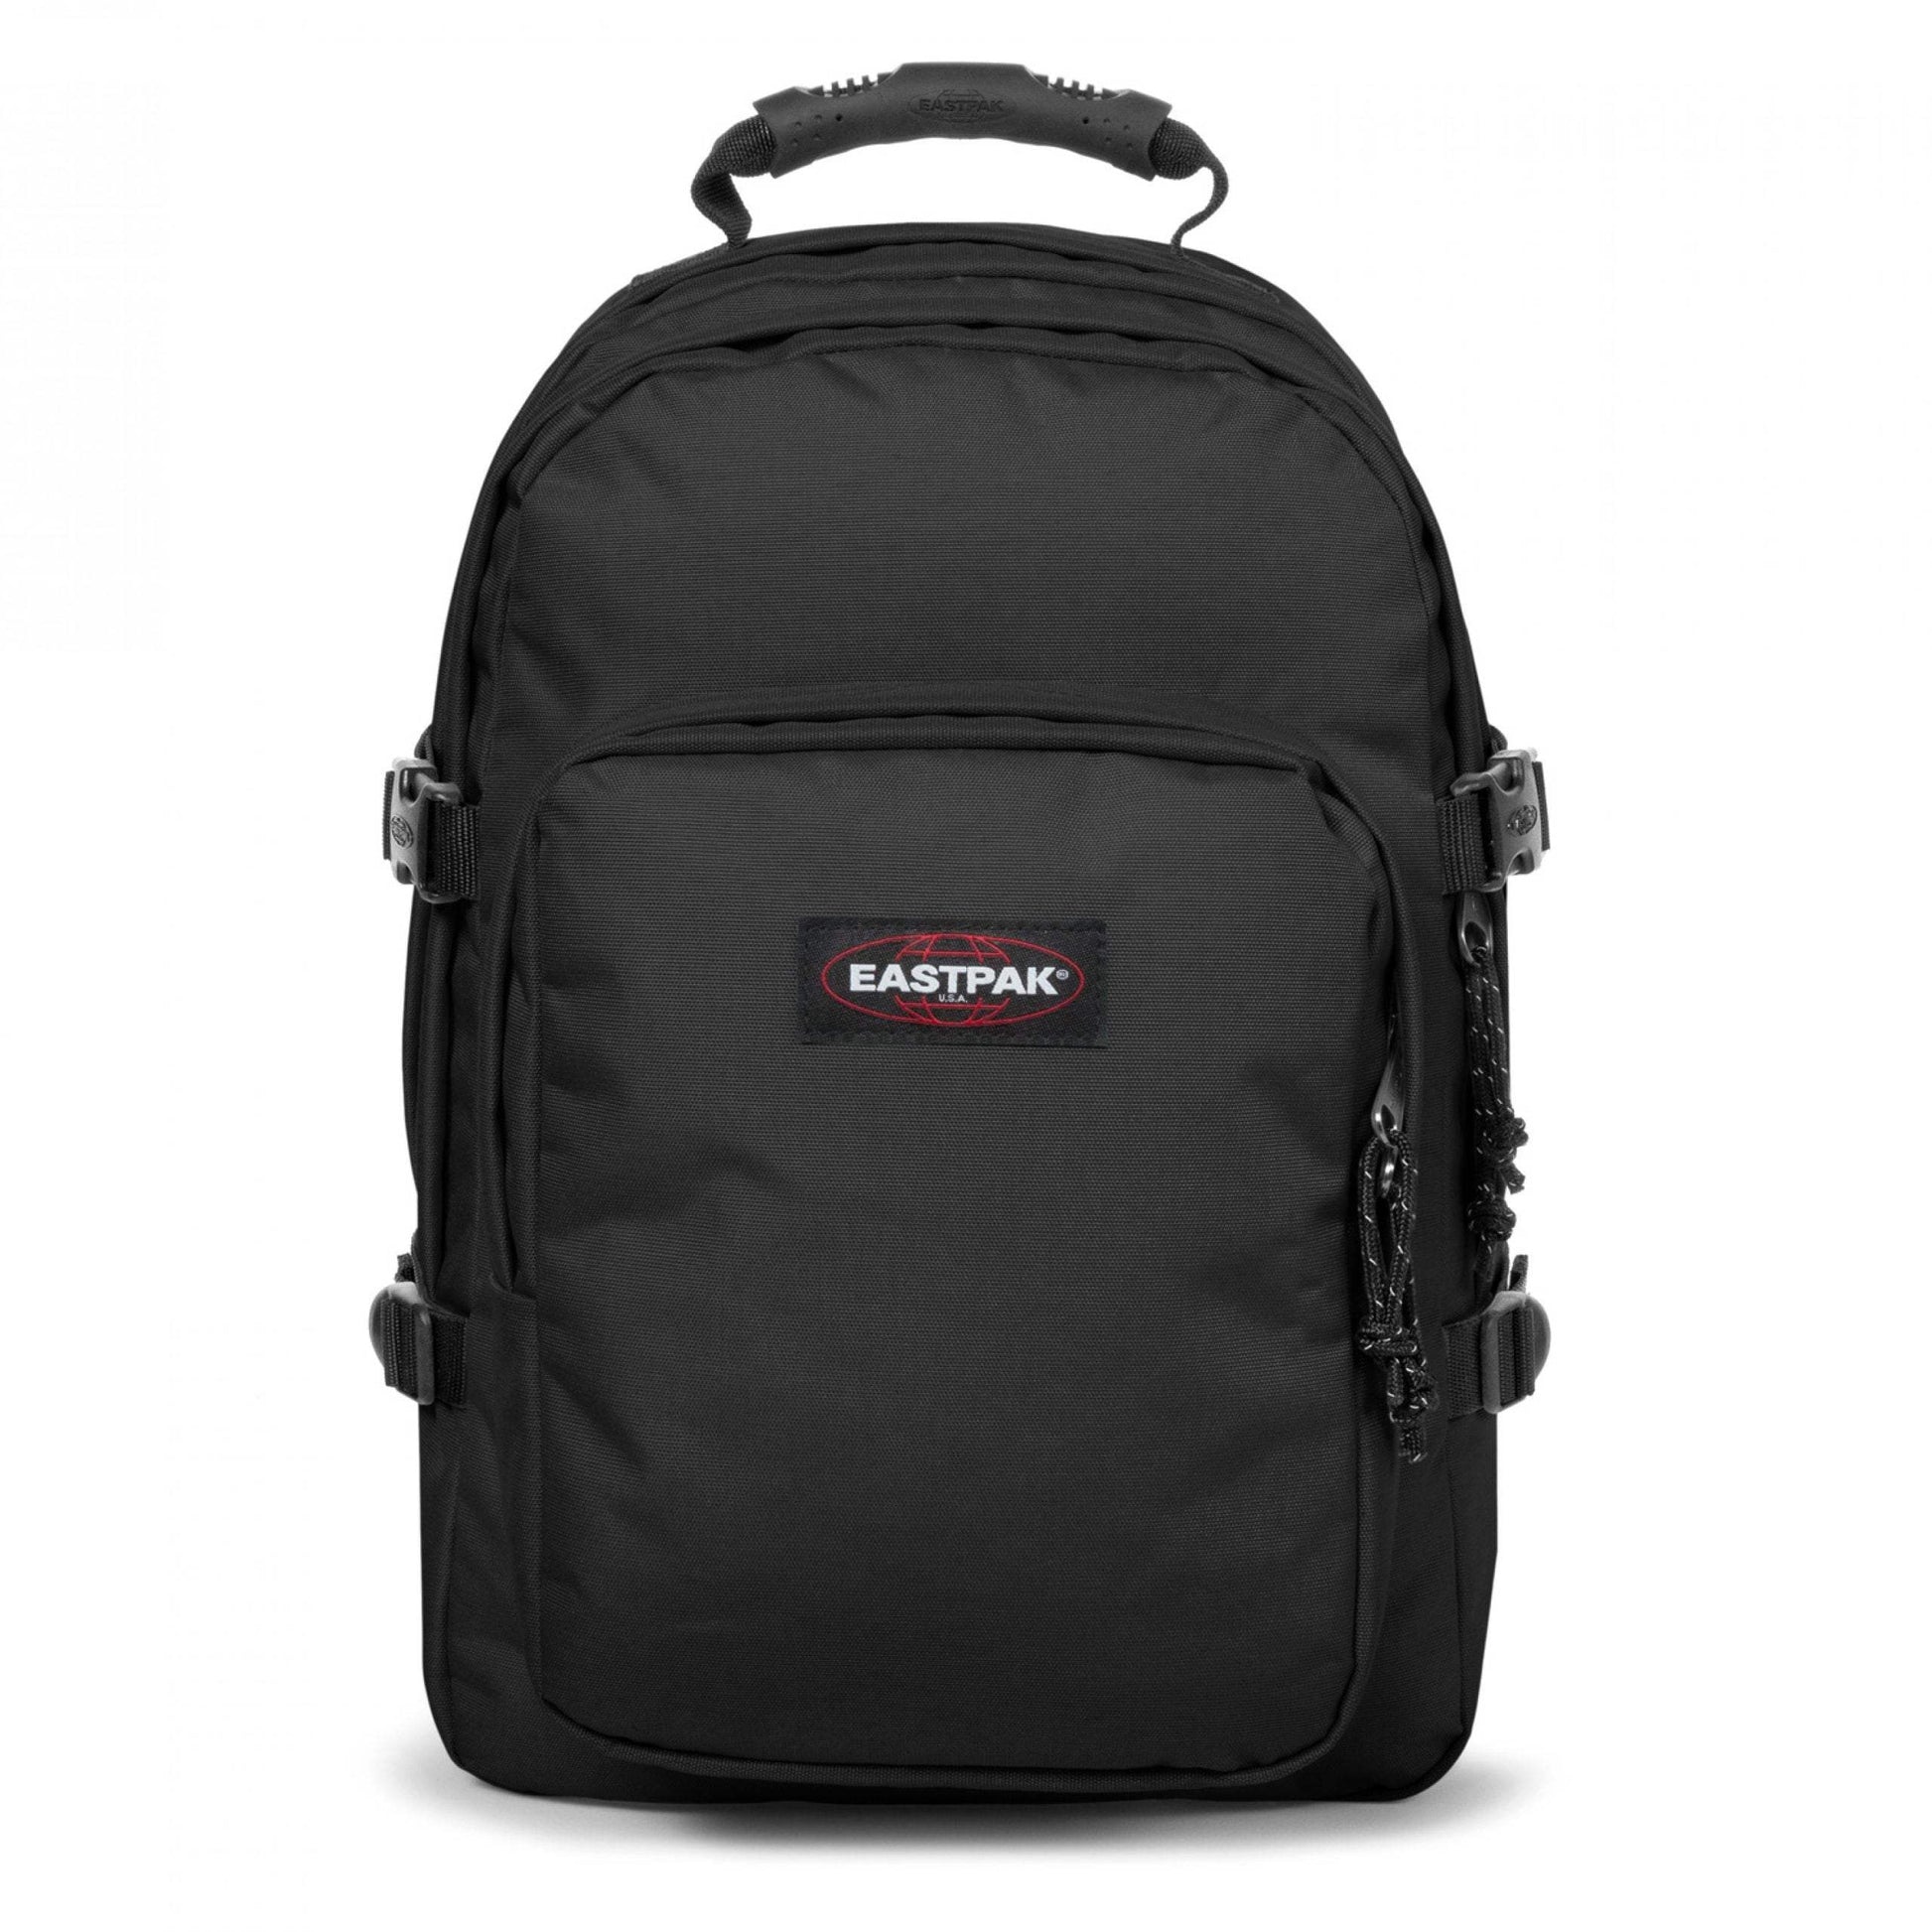 Provider by Eastpak